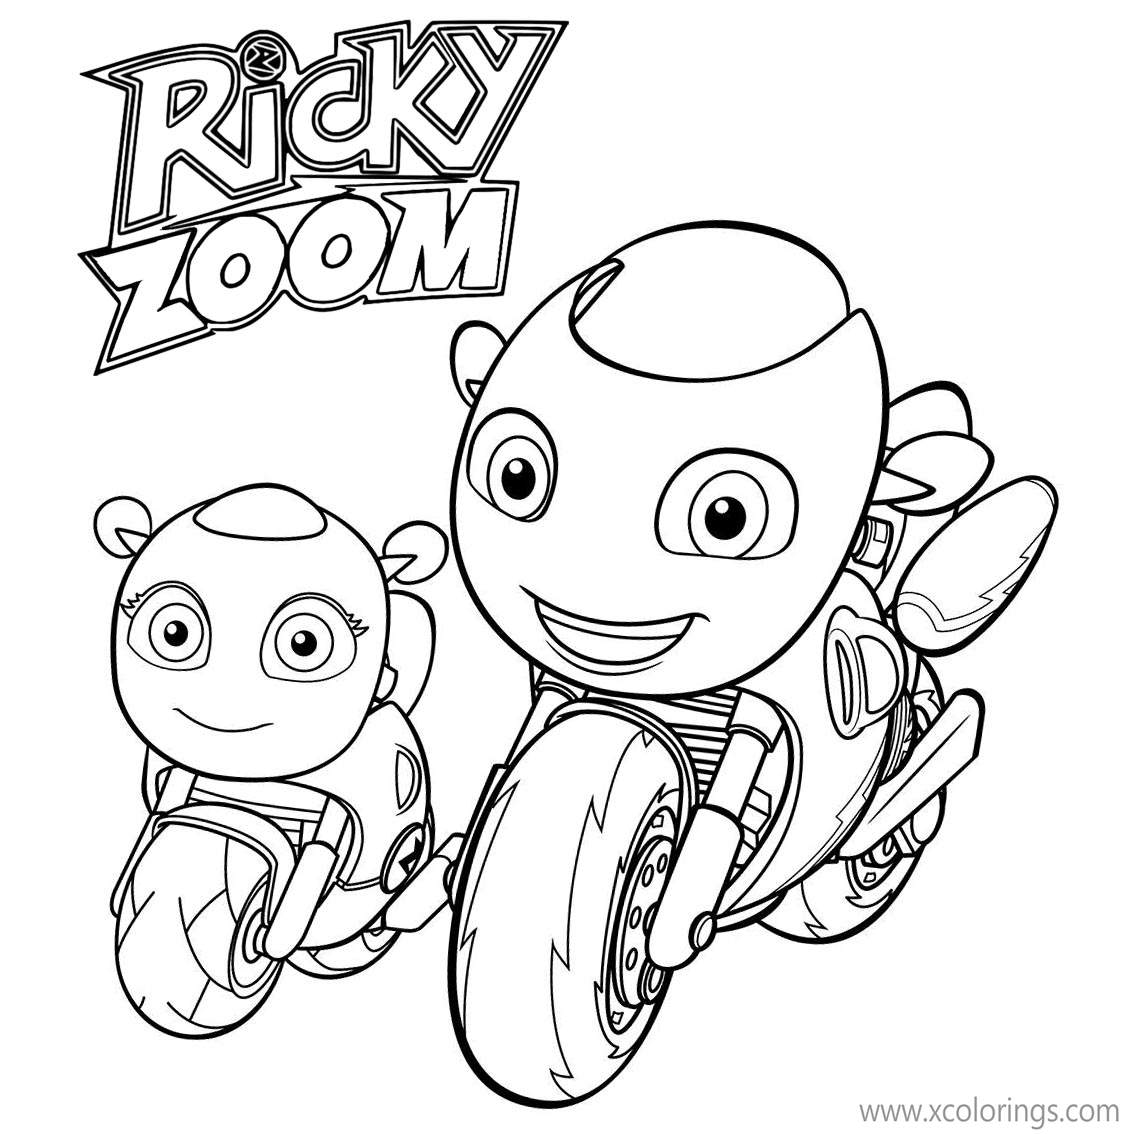 Free Ricky Zoom Coloring Pages Baby Ricky printable